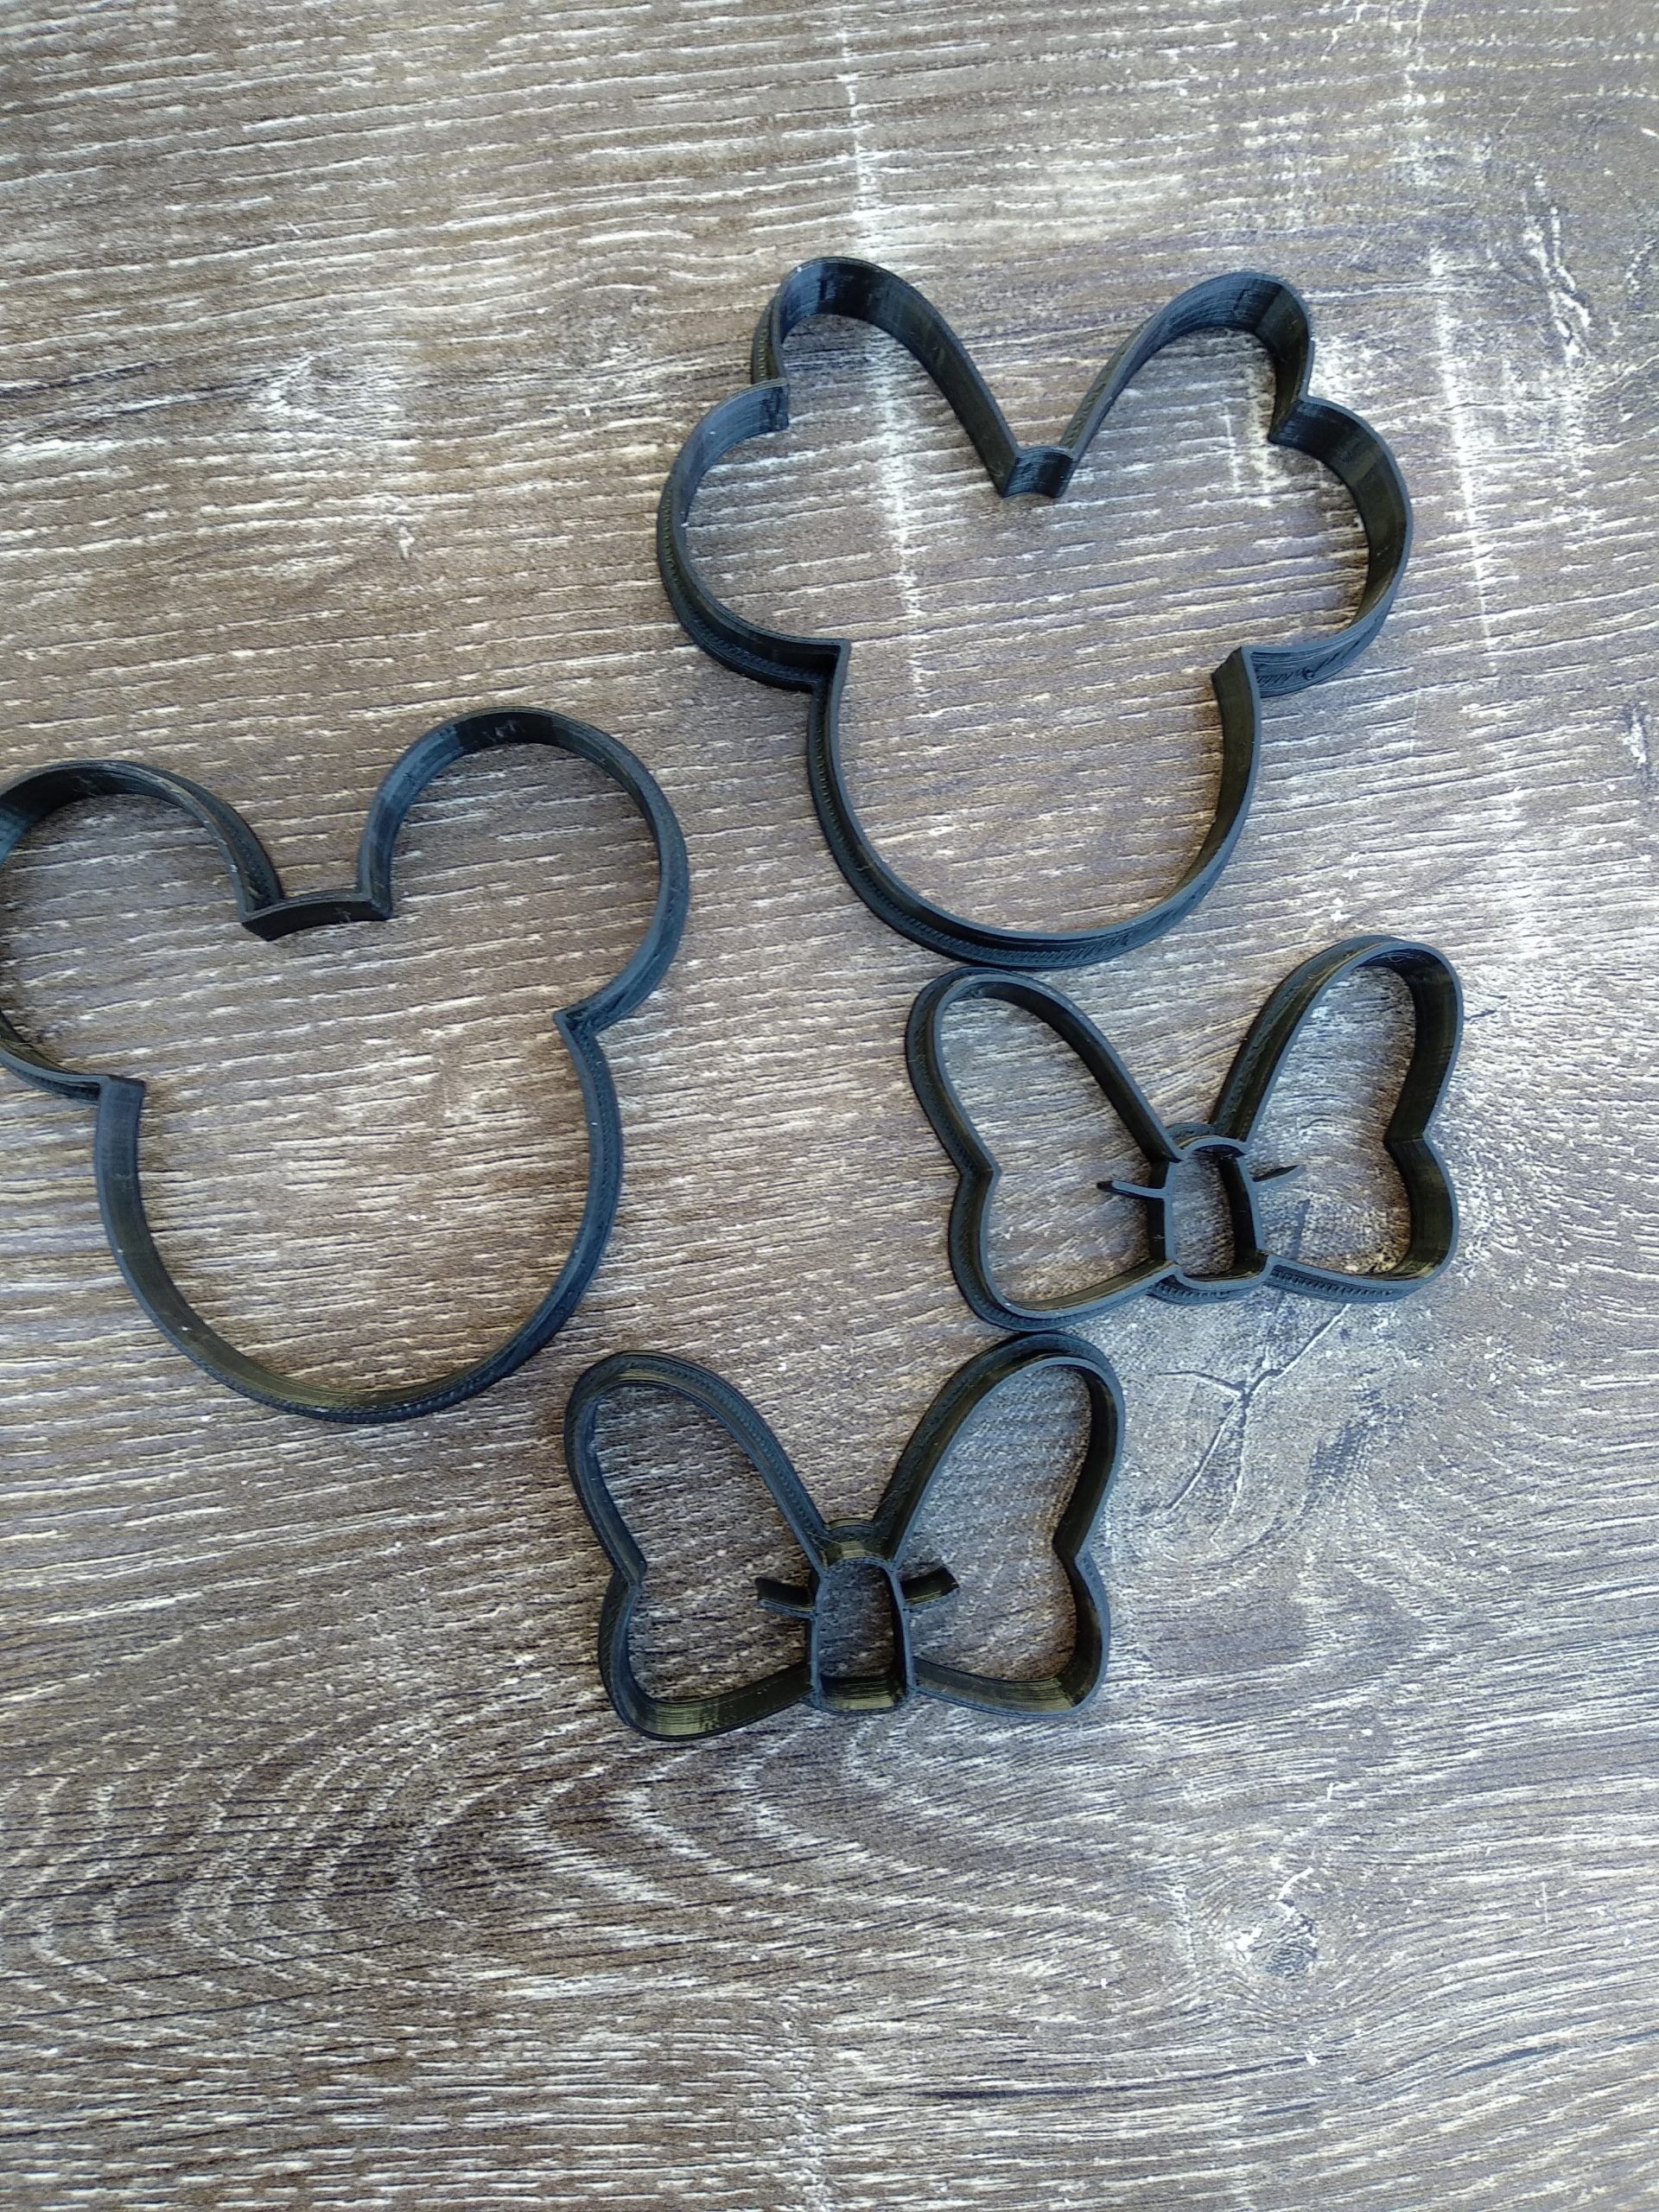 3D Mickey and Minnie Cookie CuttersCartonn Cookie StampEmbossing Cookie MoldFondant ToolsTheme Party